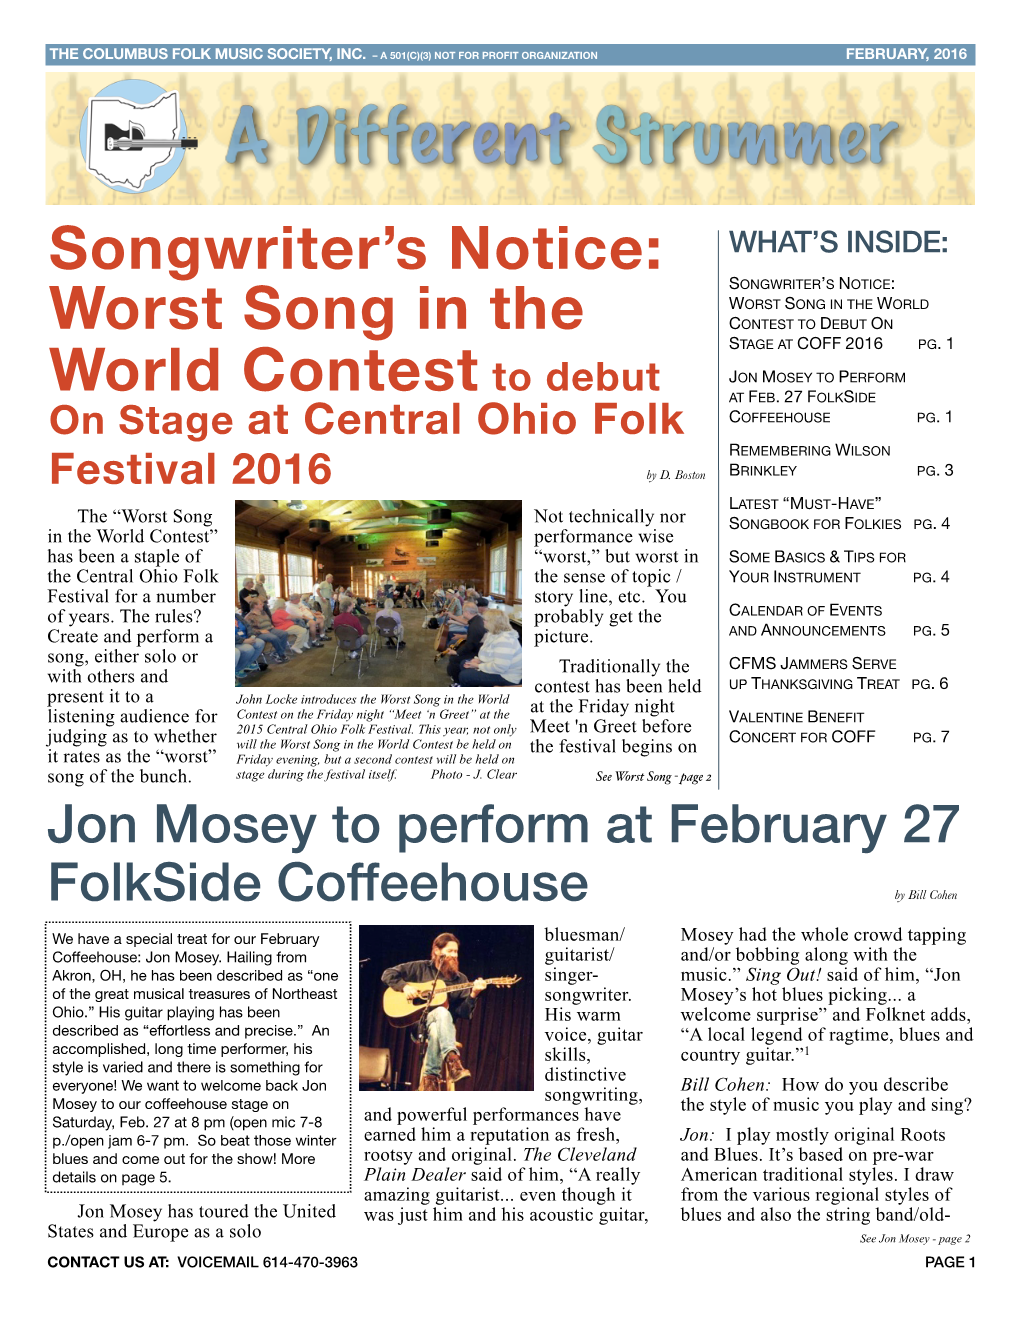 Songwriter's Notice: Worst Song in the World Contest to Debut